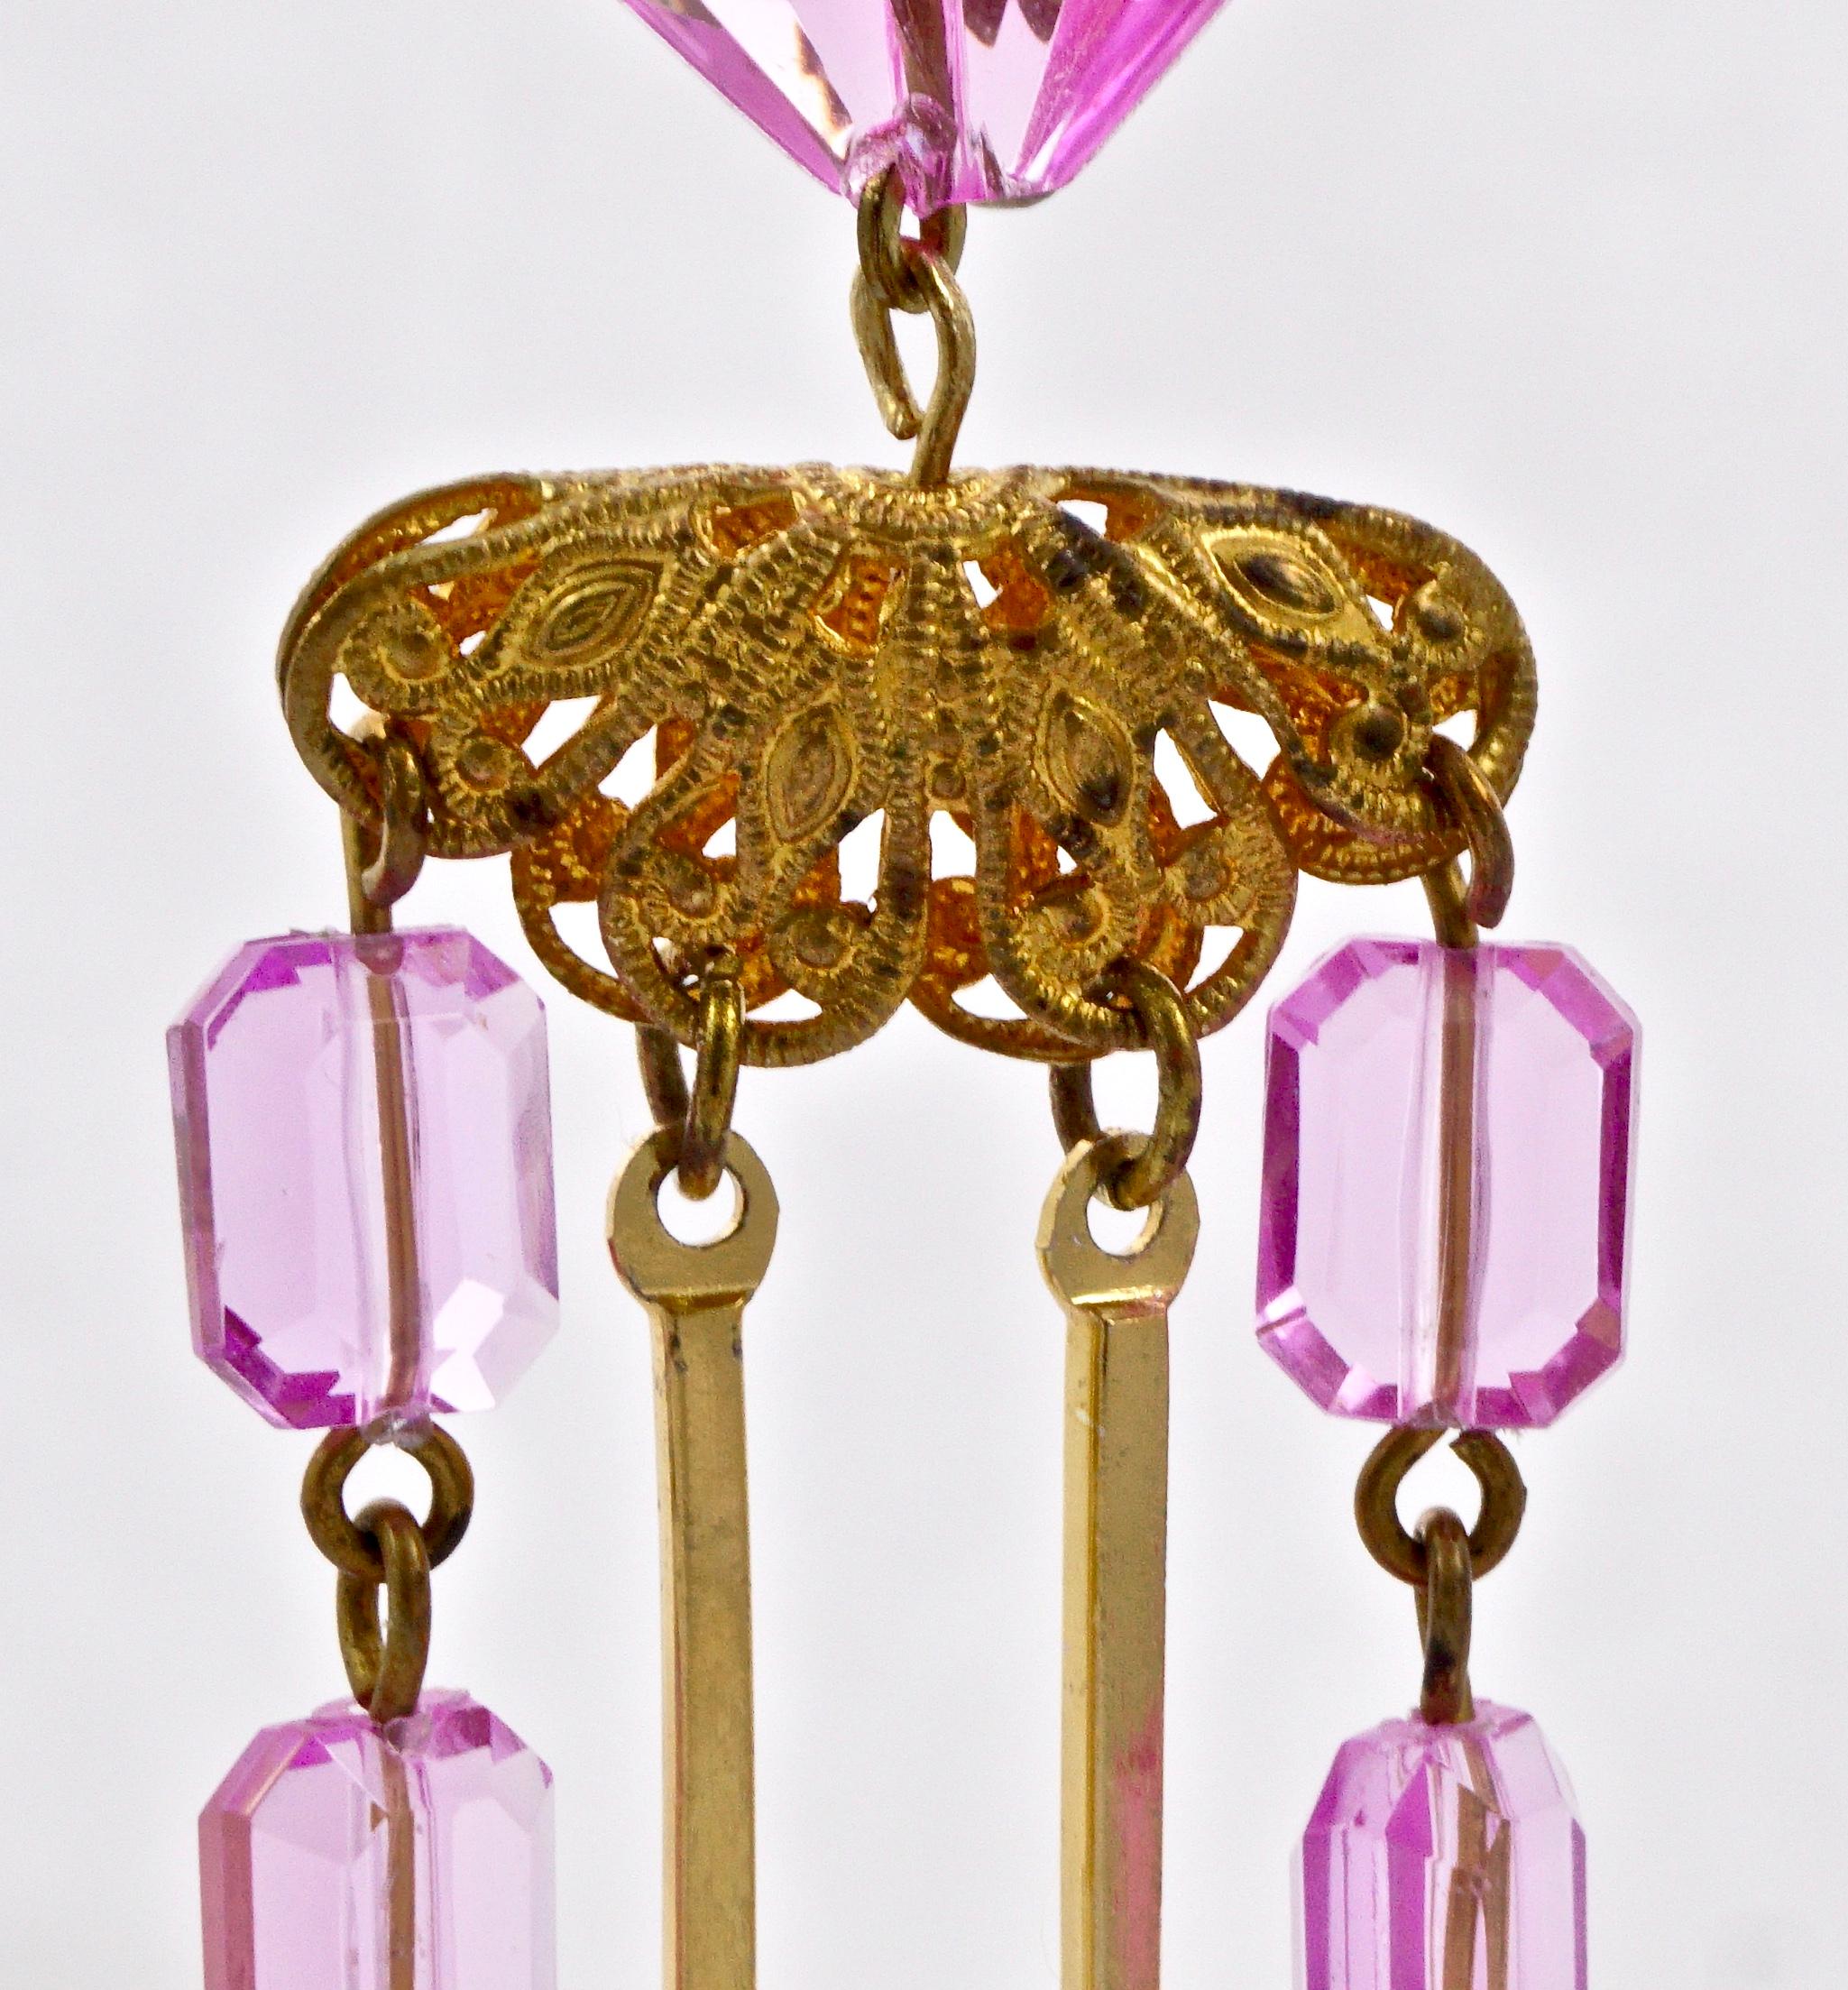 Fabulous gold plated filigree clip on chandelier earrings, featuring four strands of pink plastic beads. Measuring length 9.7cm / 3.8 inches. The earrings are light to wear. There is some wear to the gold plating.

These are stunning vintage